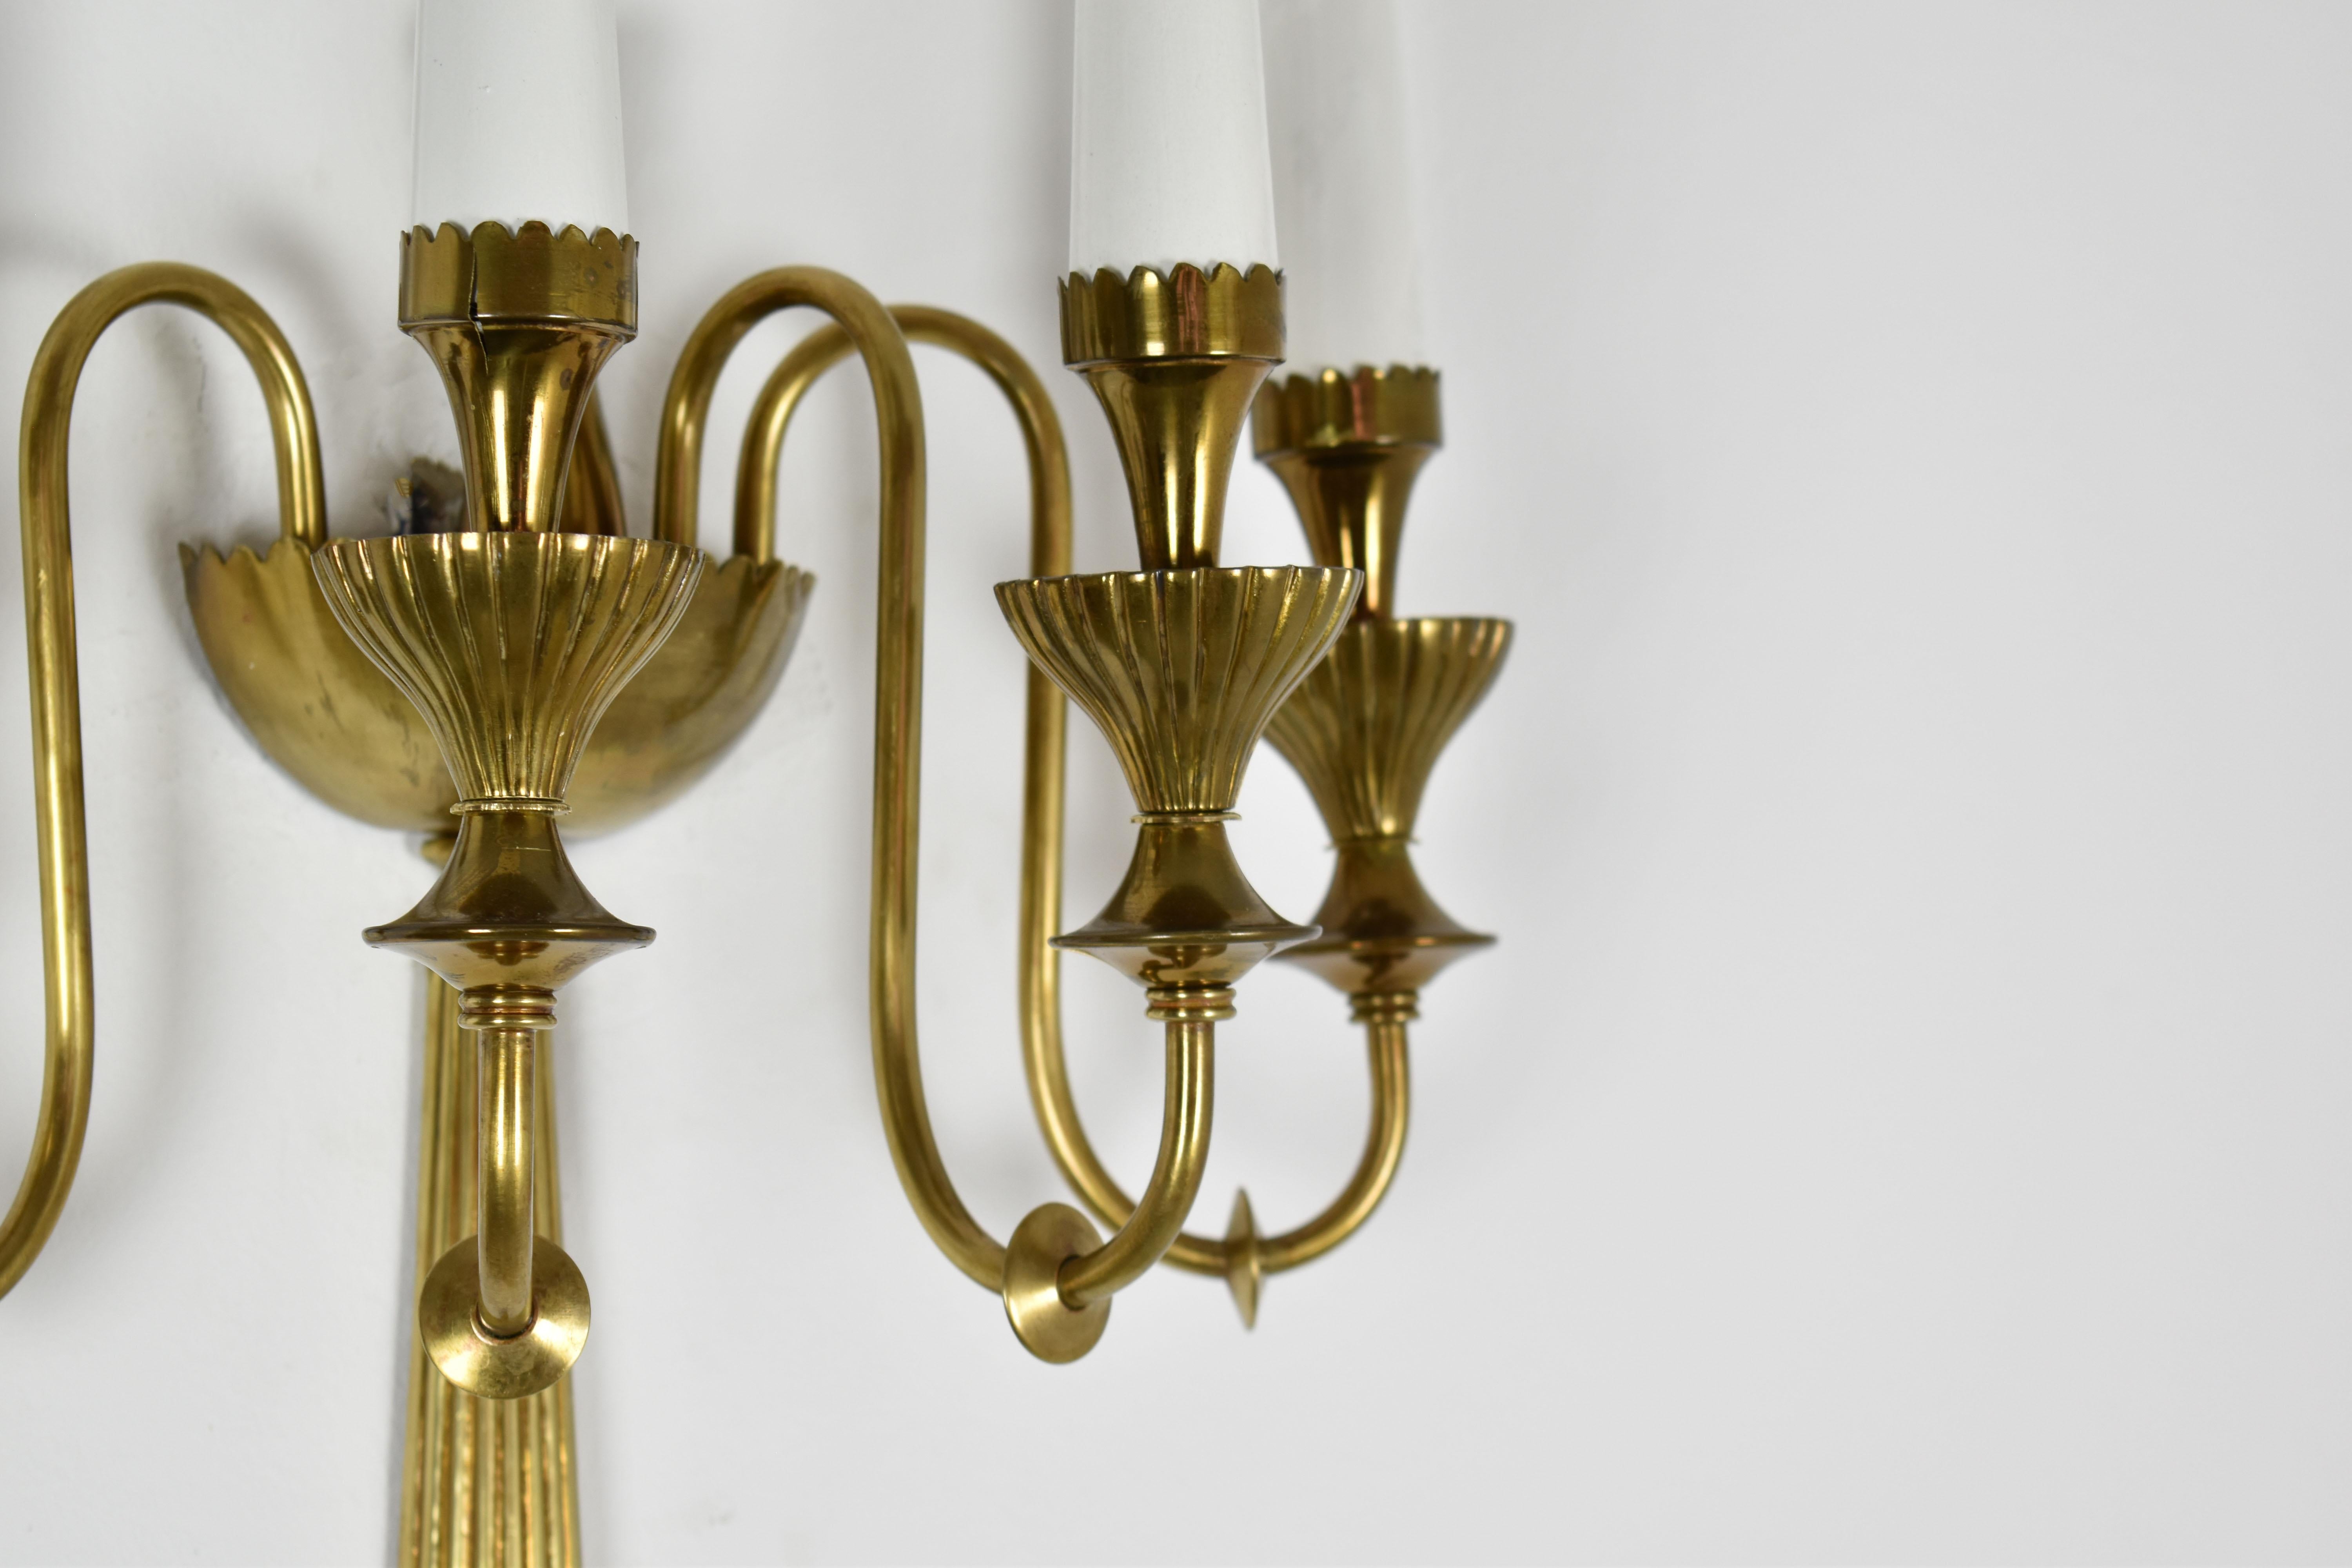 Mid-20th Century Pair of Four-Light Italian Brass Candelabra Sconces, 1940s For Sale